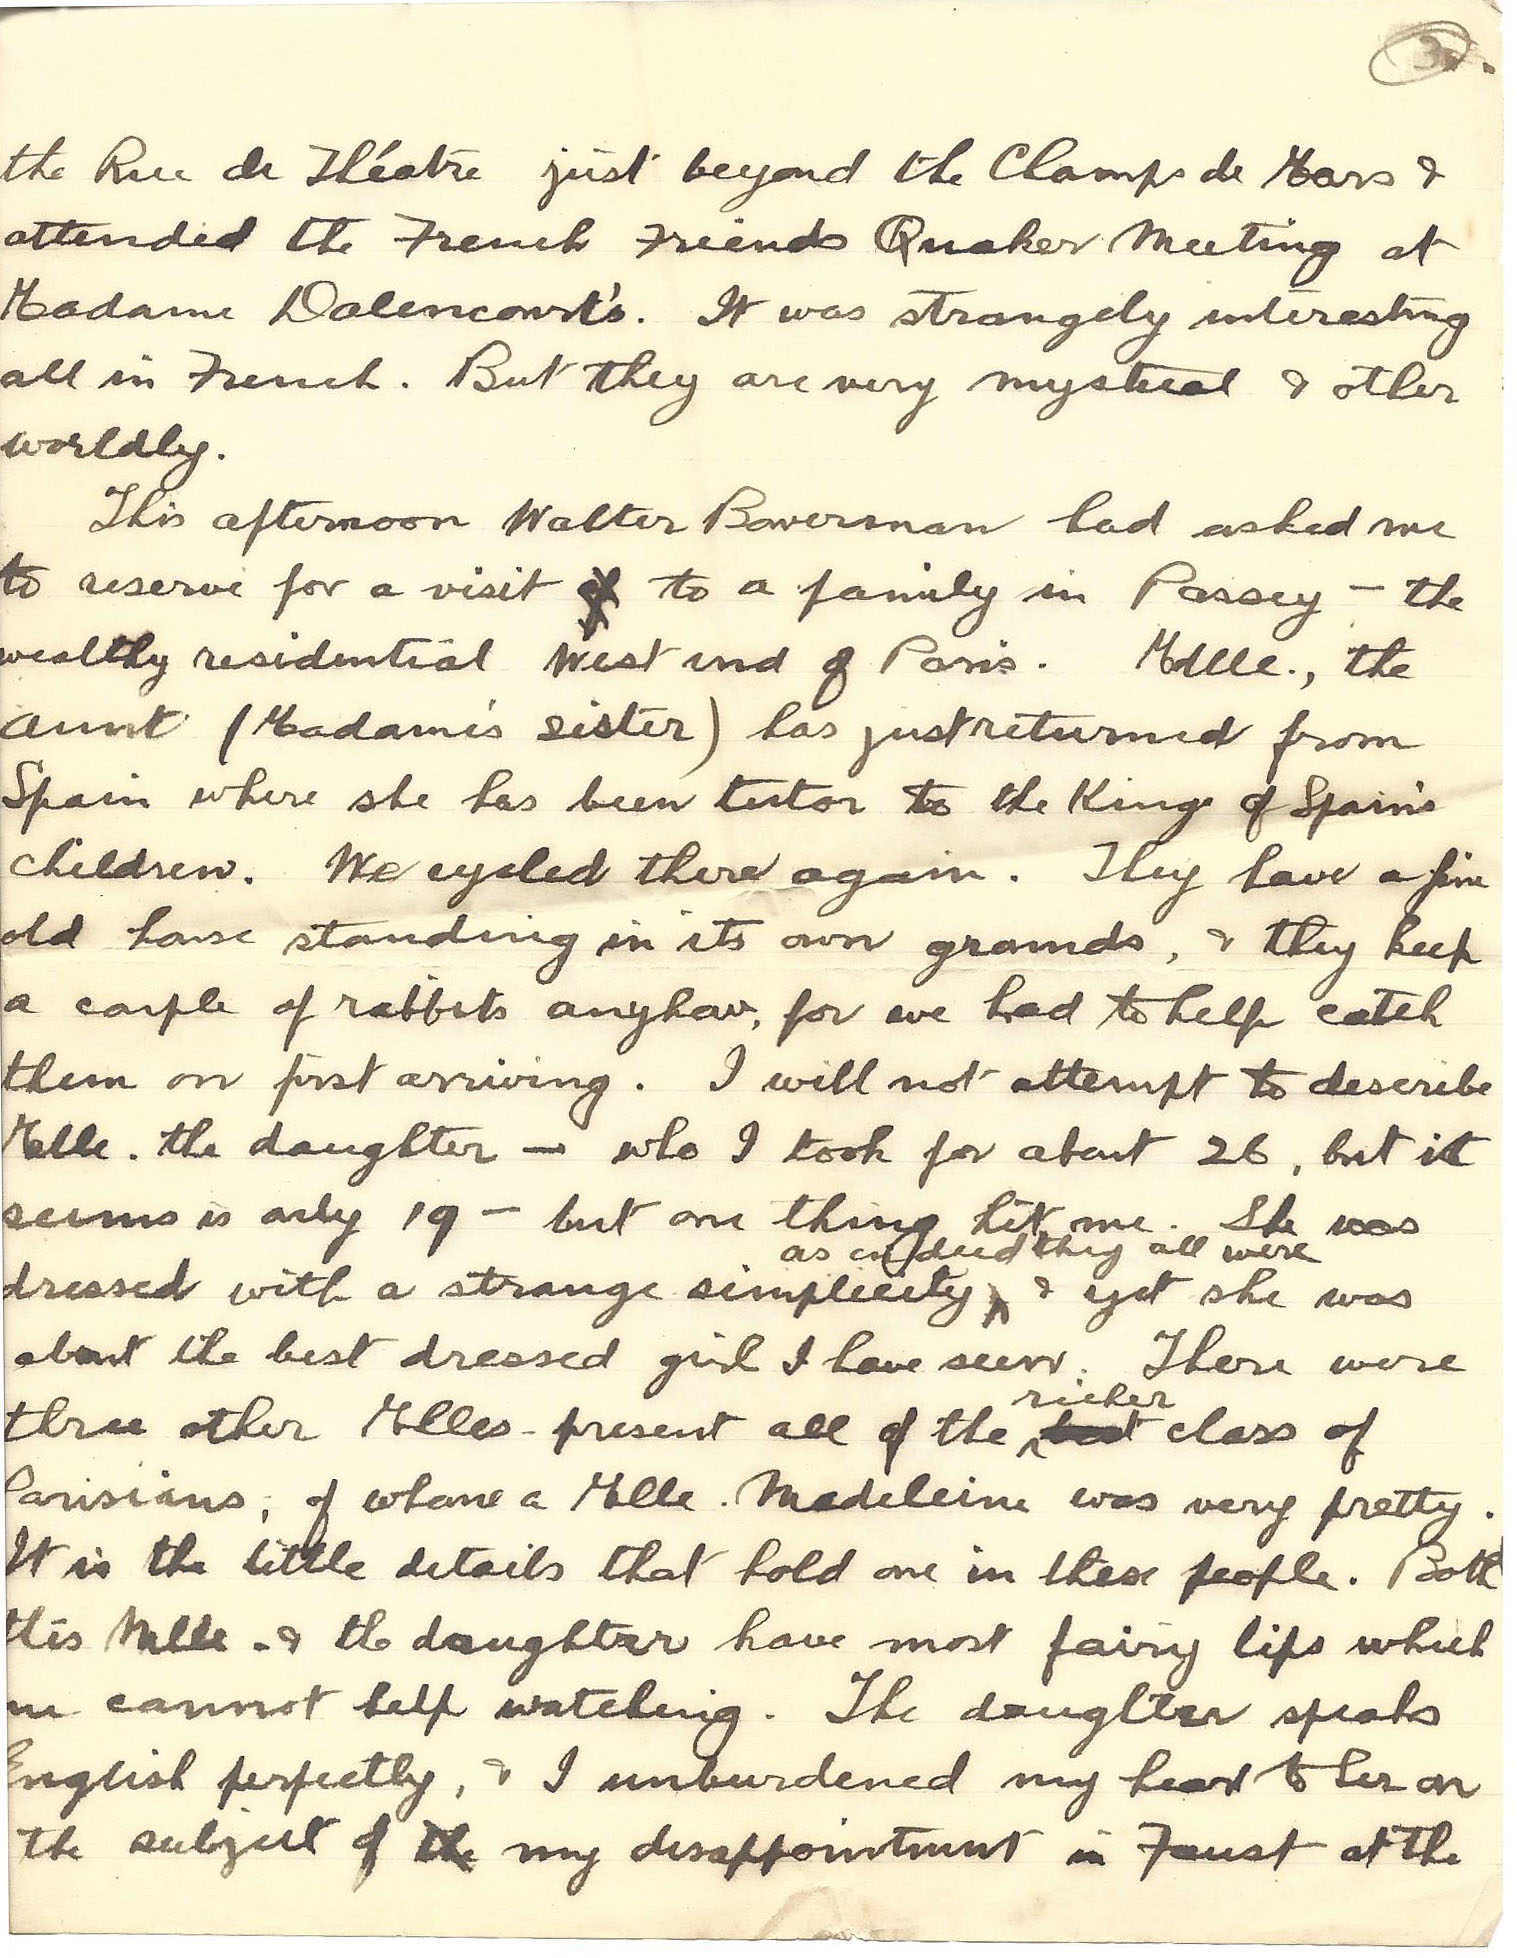 1919-07-20 p3 Donald Bearman letter to his father